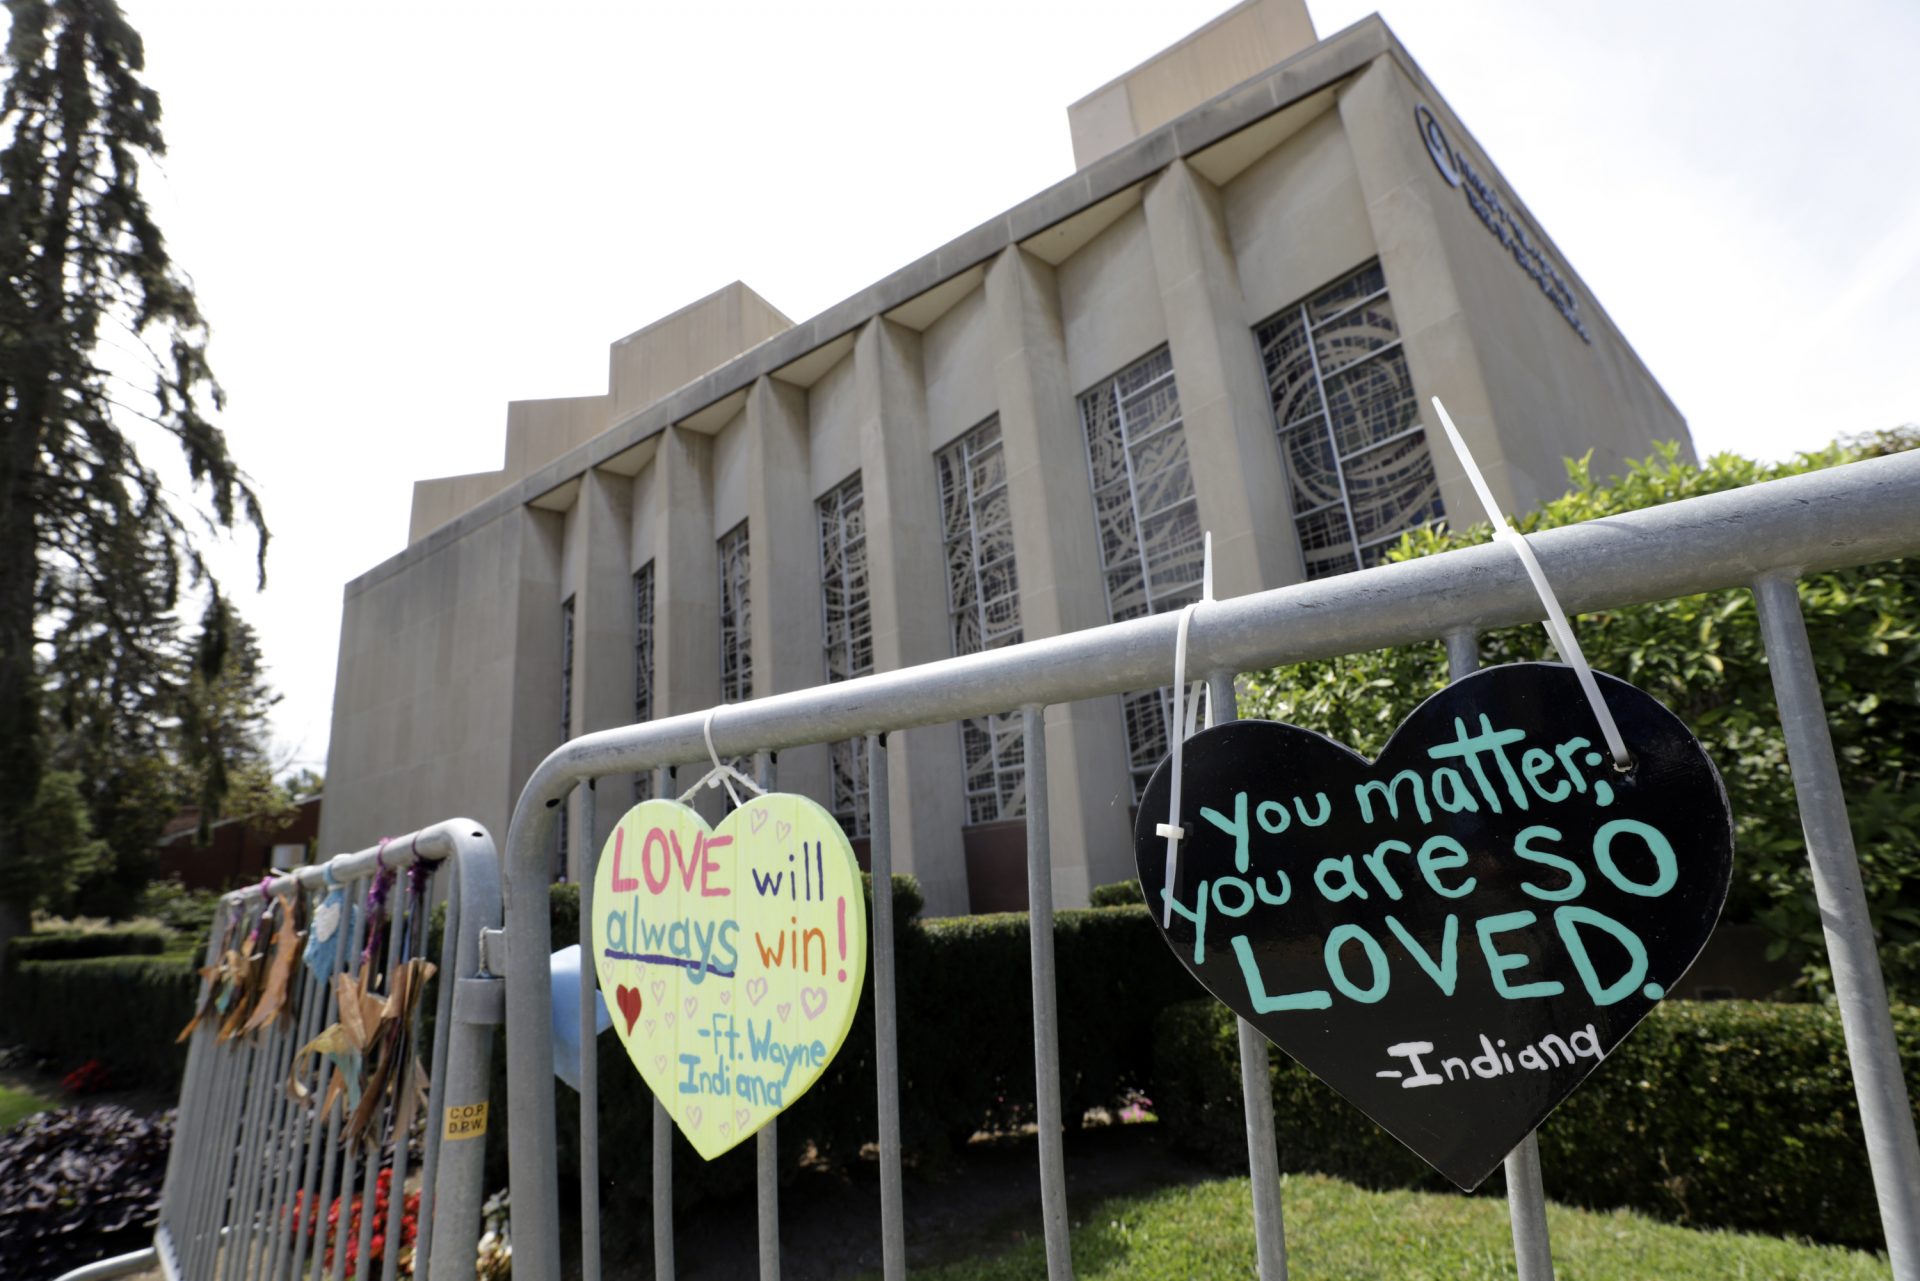 Signs hang on a fence surrounding the Tree of Life synagogue in Pittsburgh on Tuesday, Sept. 17, 2019. The first anniversary of the shooting at the synagogue, that killed 11 worshippers, is Oct., 27, 2019. Authorities charged Robert Bowers, 47, a truck driver from Baldwin, Pennsylvania, in the attack that killed eight men and three women, and wounded seven others inside Tree of Life synagogue, where congregants from New Light and Dor Hadash also had gathered. Bowers has pleaded not guilty . He faces the death penalty if convicted.